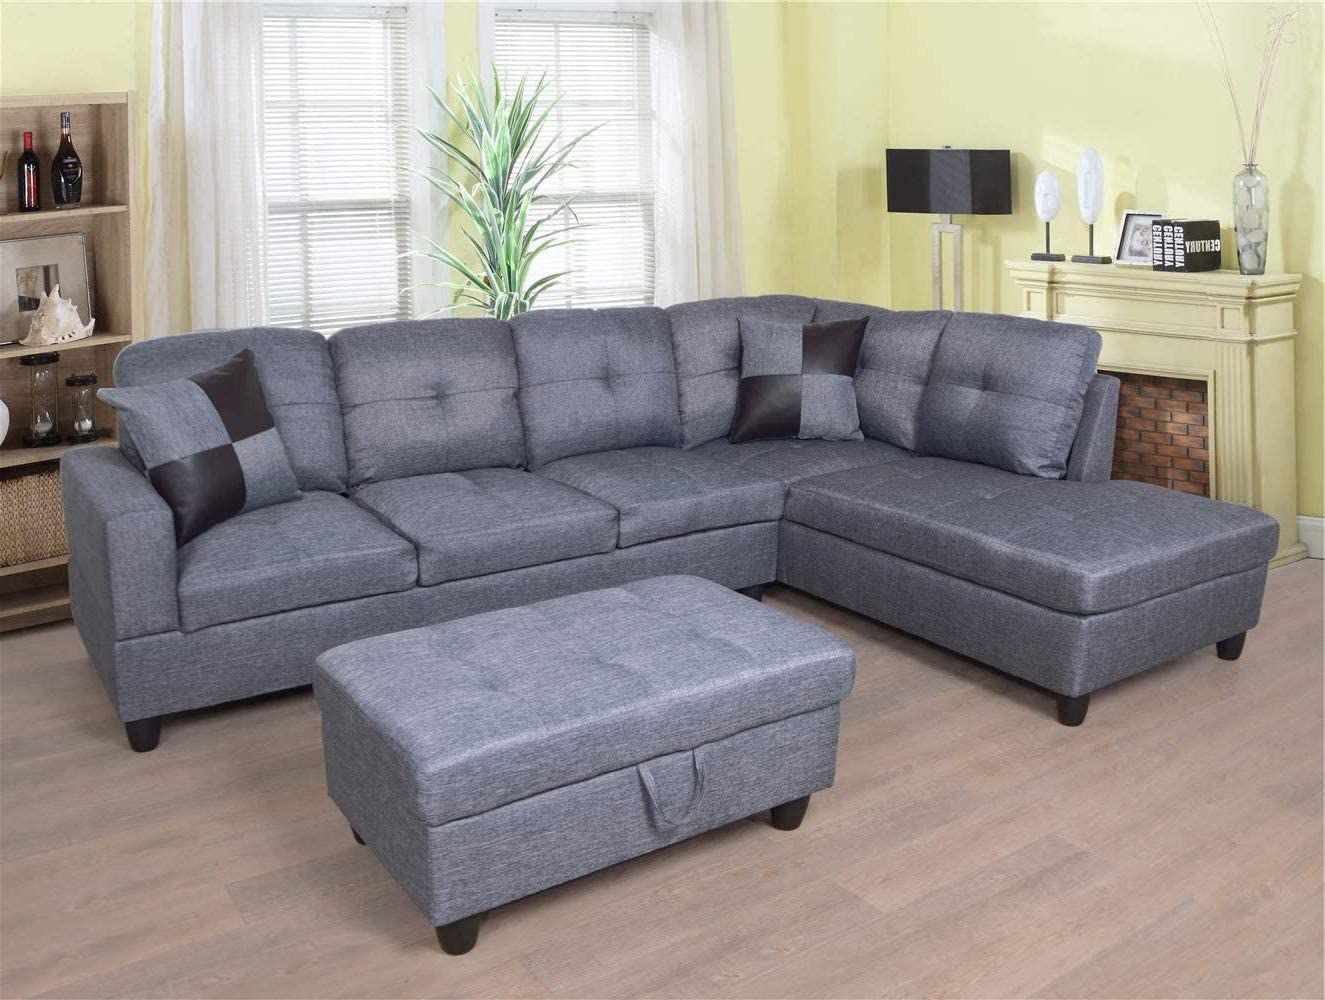 Ponliving Furniture 3 Pcpiece Sectional Sofa Couch Set, L Pertaining To Owego L Shaped Sectional Sofas (View 1 of 15)